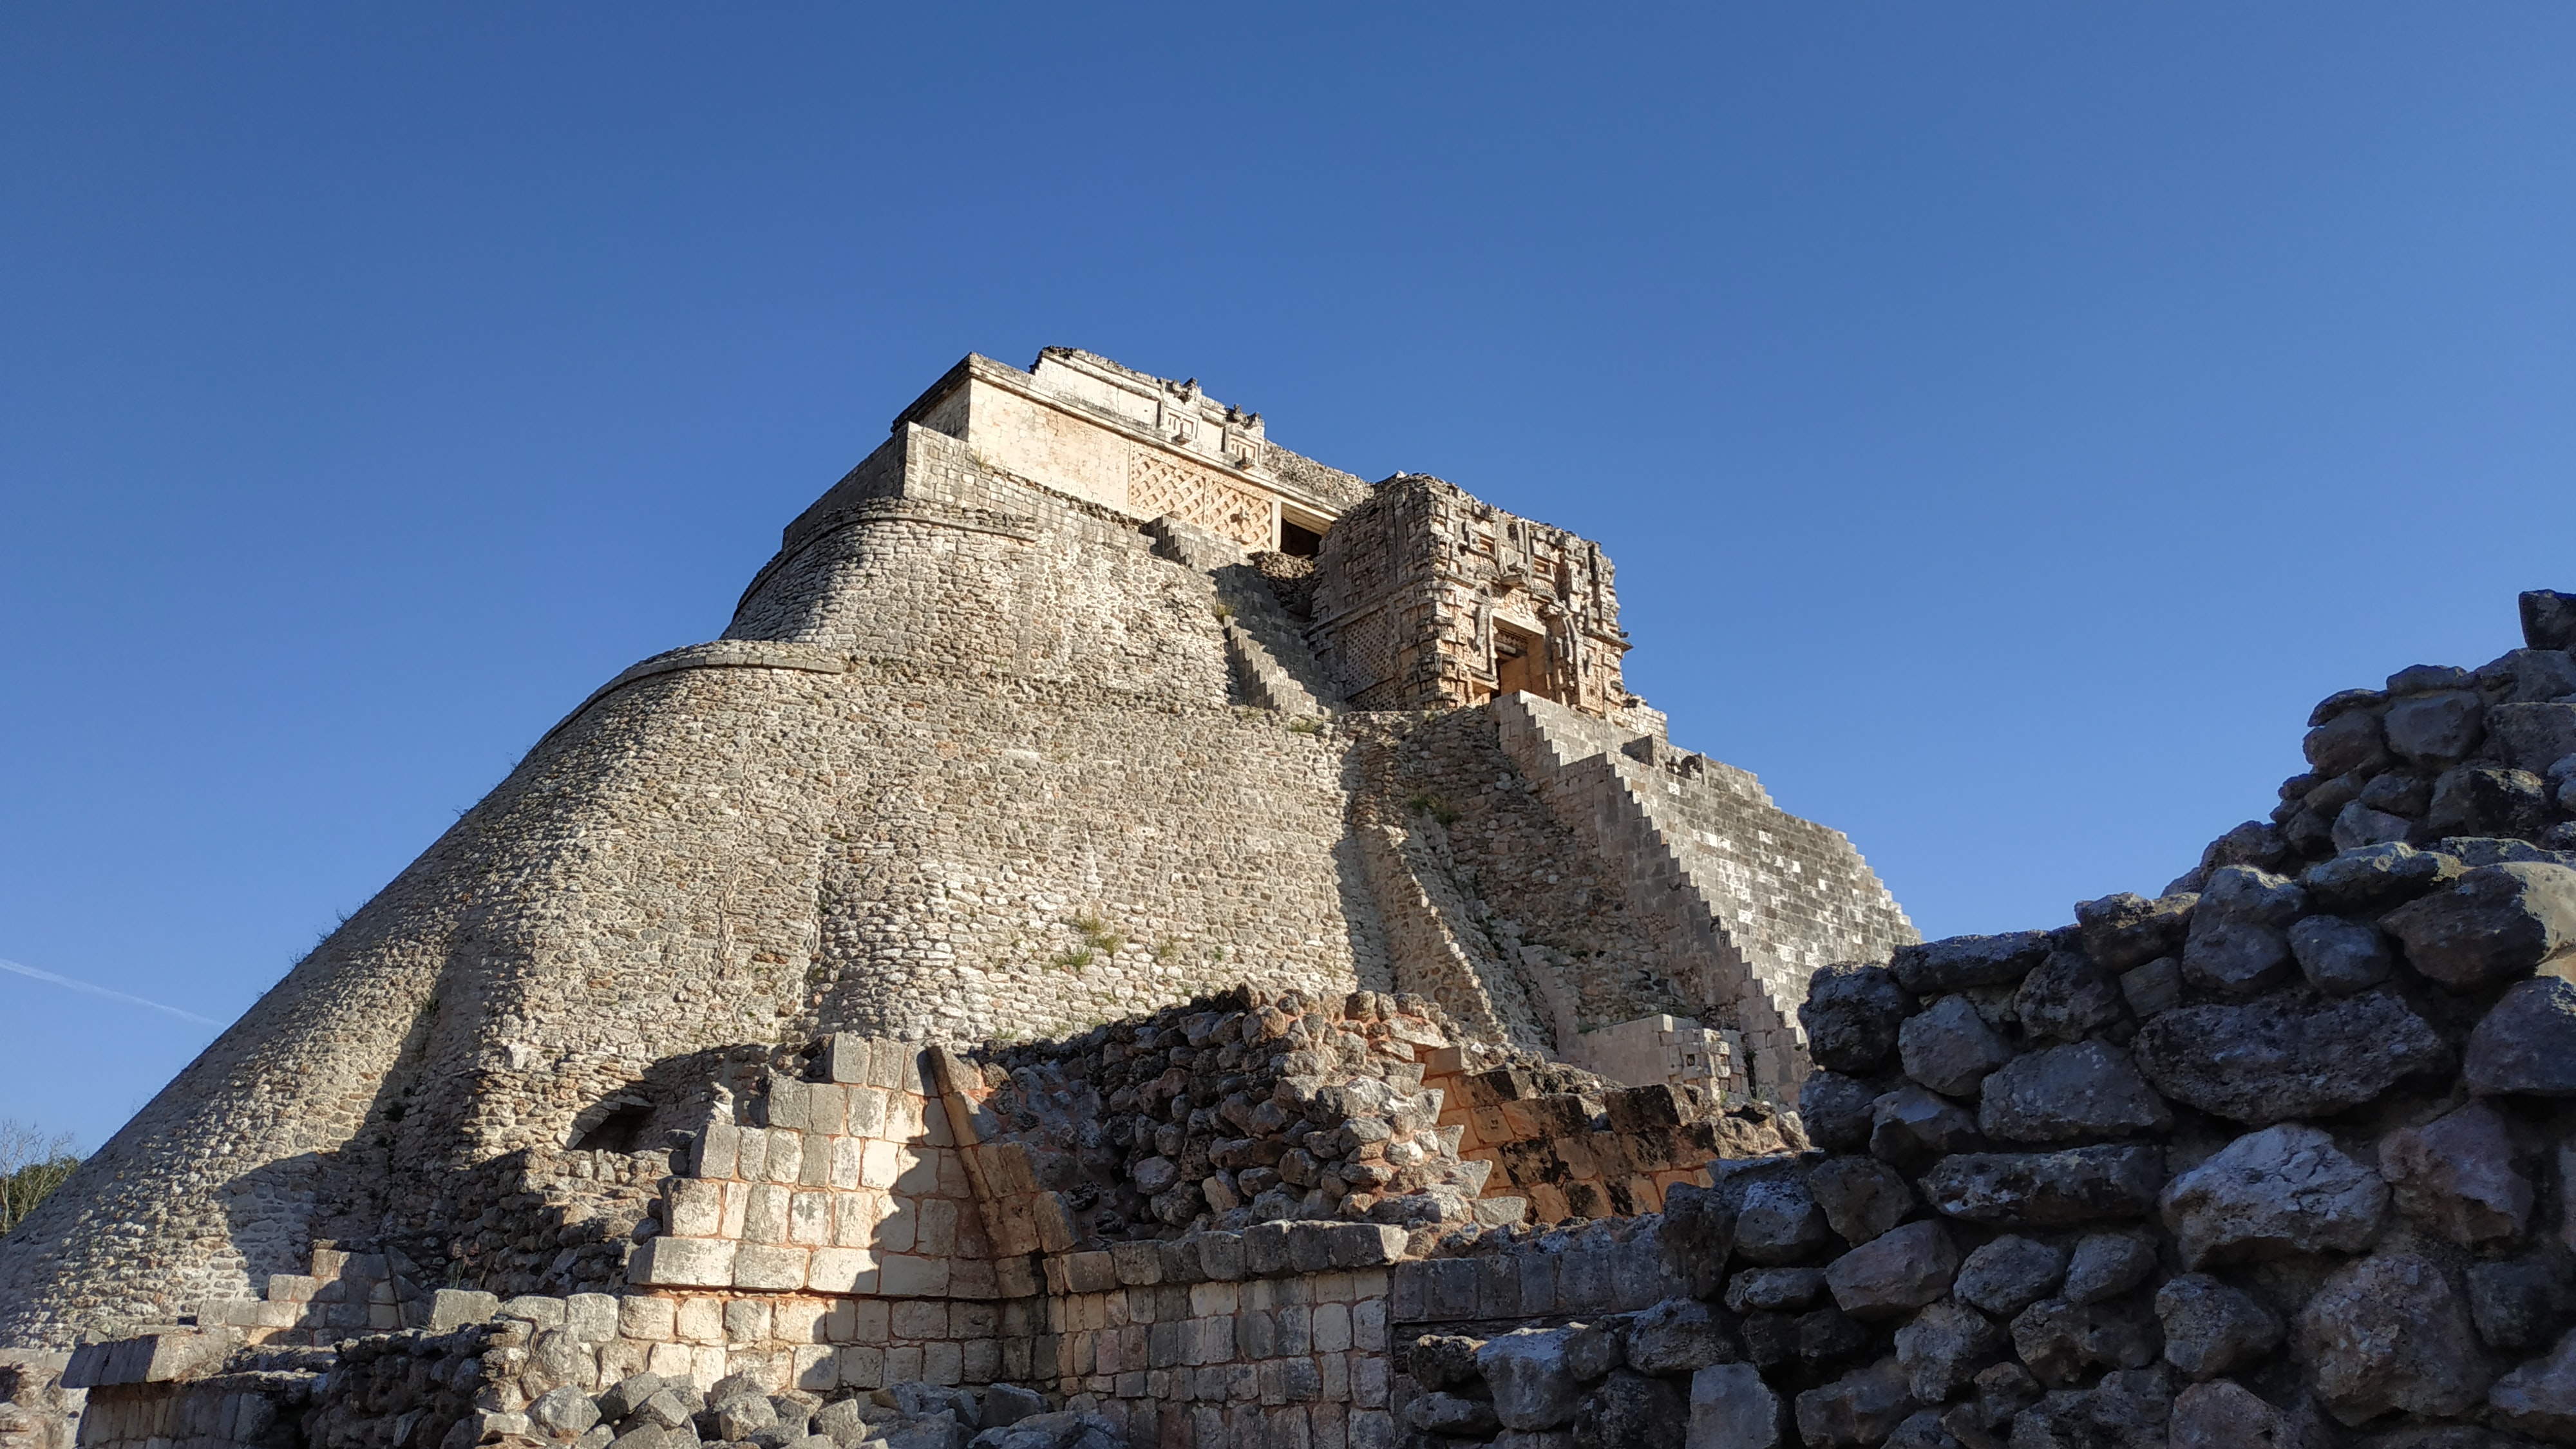 Day5 : Day 5 - UXMAL SITE, BIKE RIDE AND SWIMMING IN A CENOT